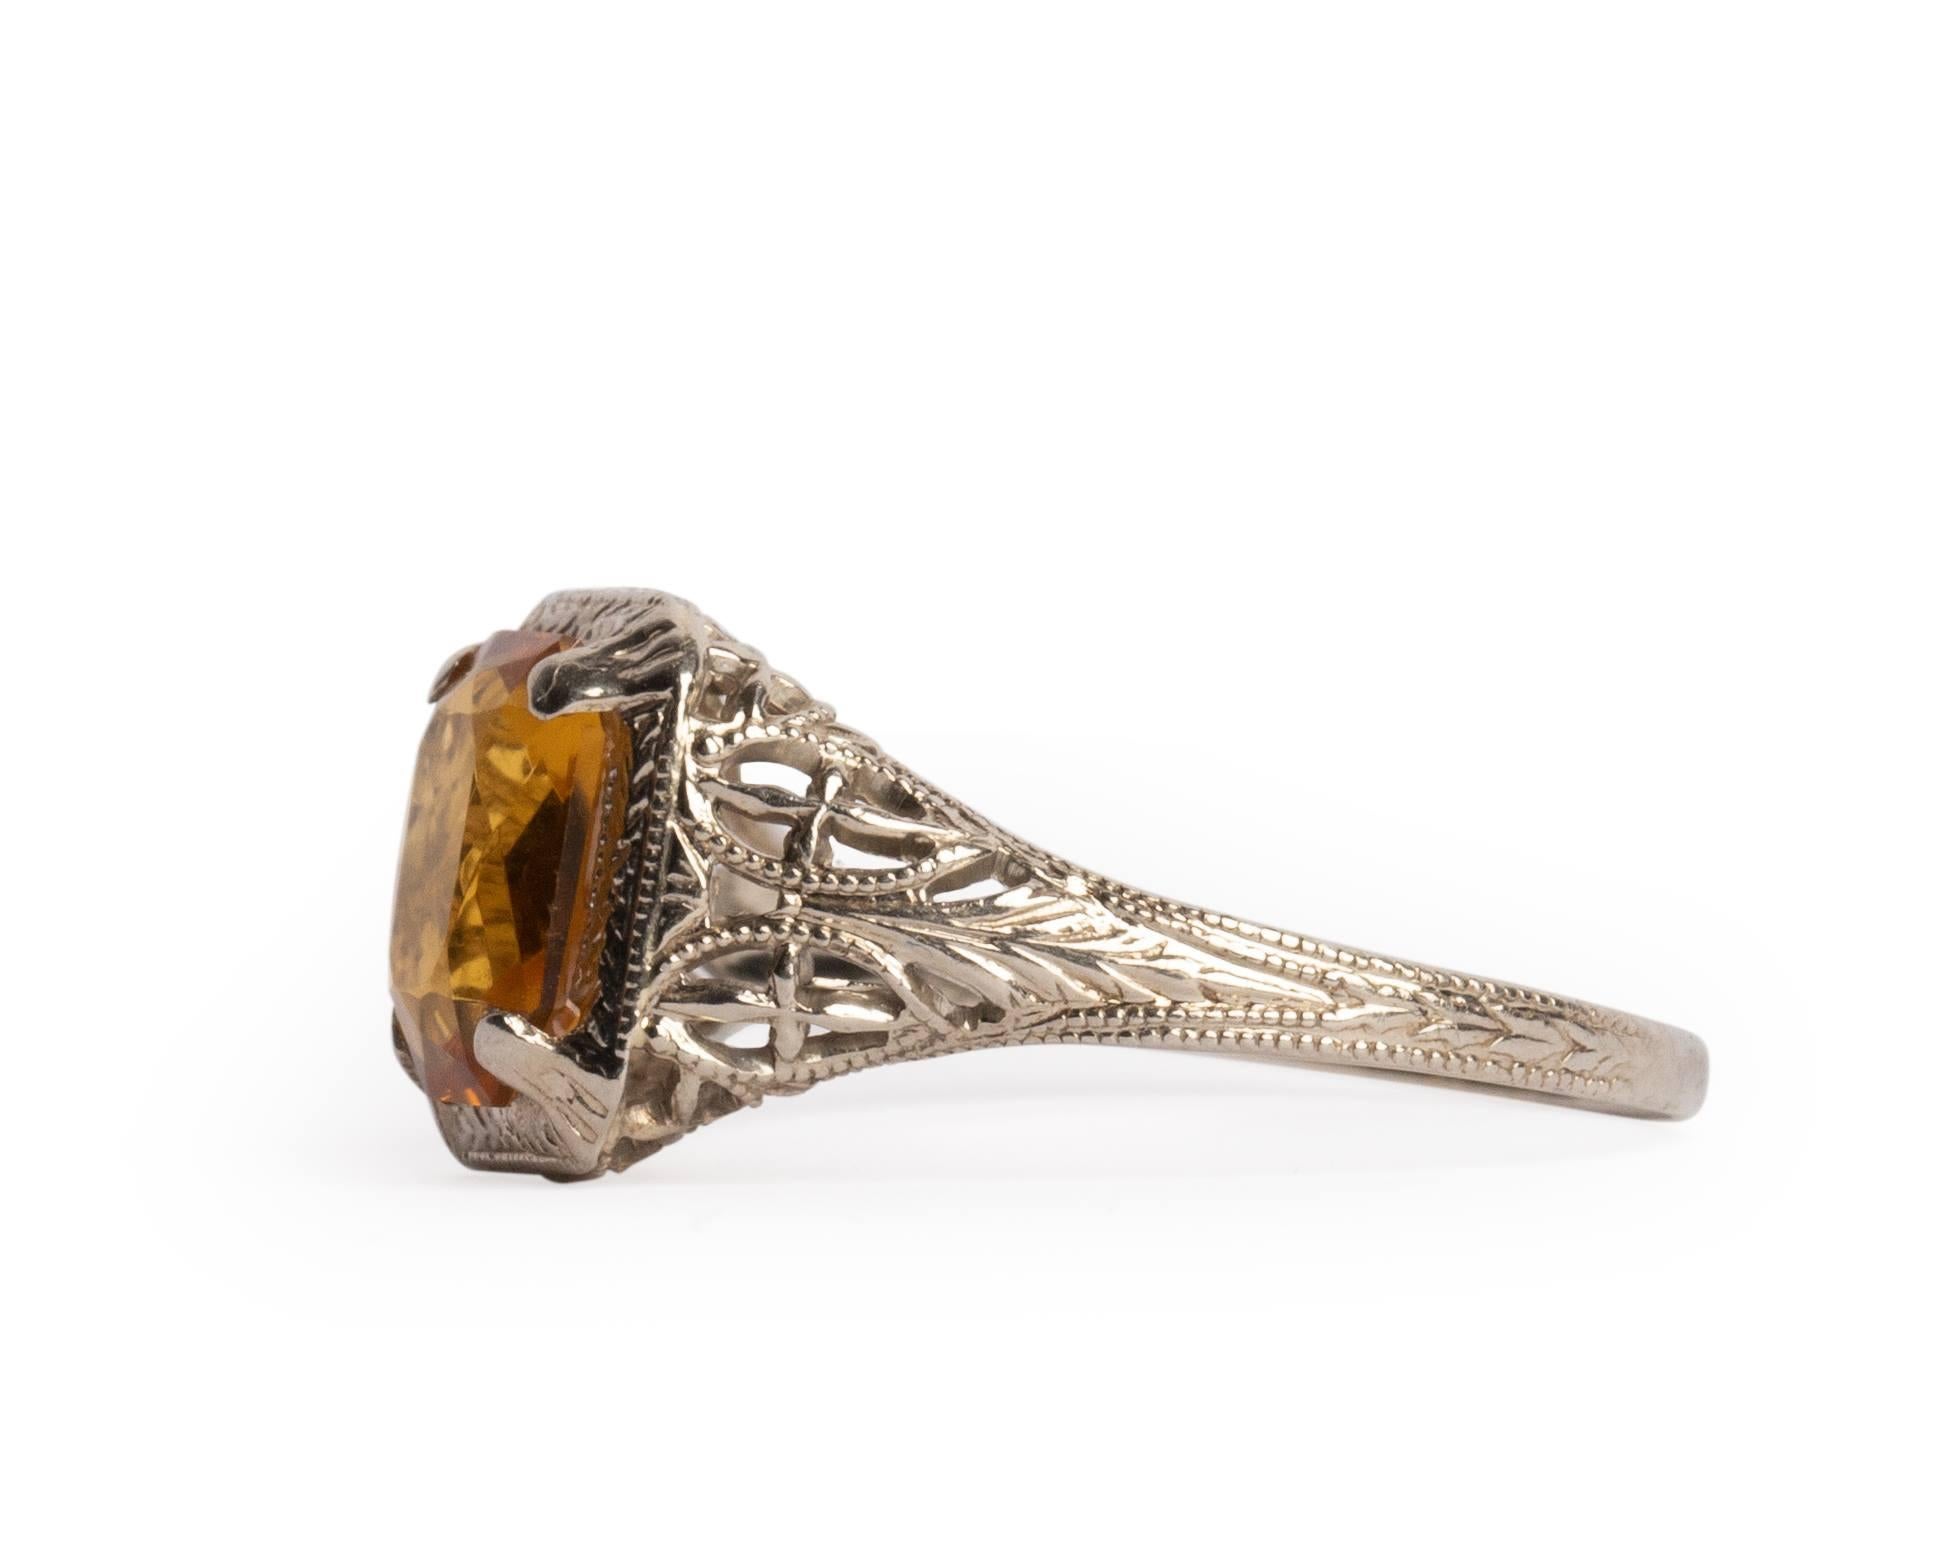 This piece is crafted of 14K white gold featuring intricate filigree and carved details that cascade down the shoulders complimenting the center gem perfectly. The center is a  beautiful amber colored citrine in a radiant cut. The color of the